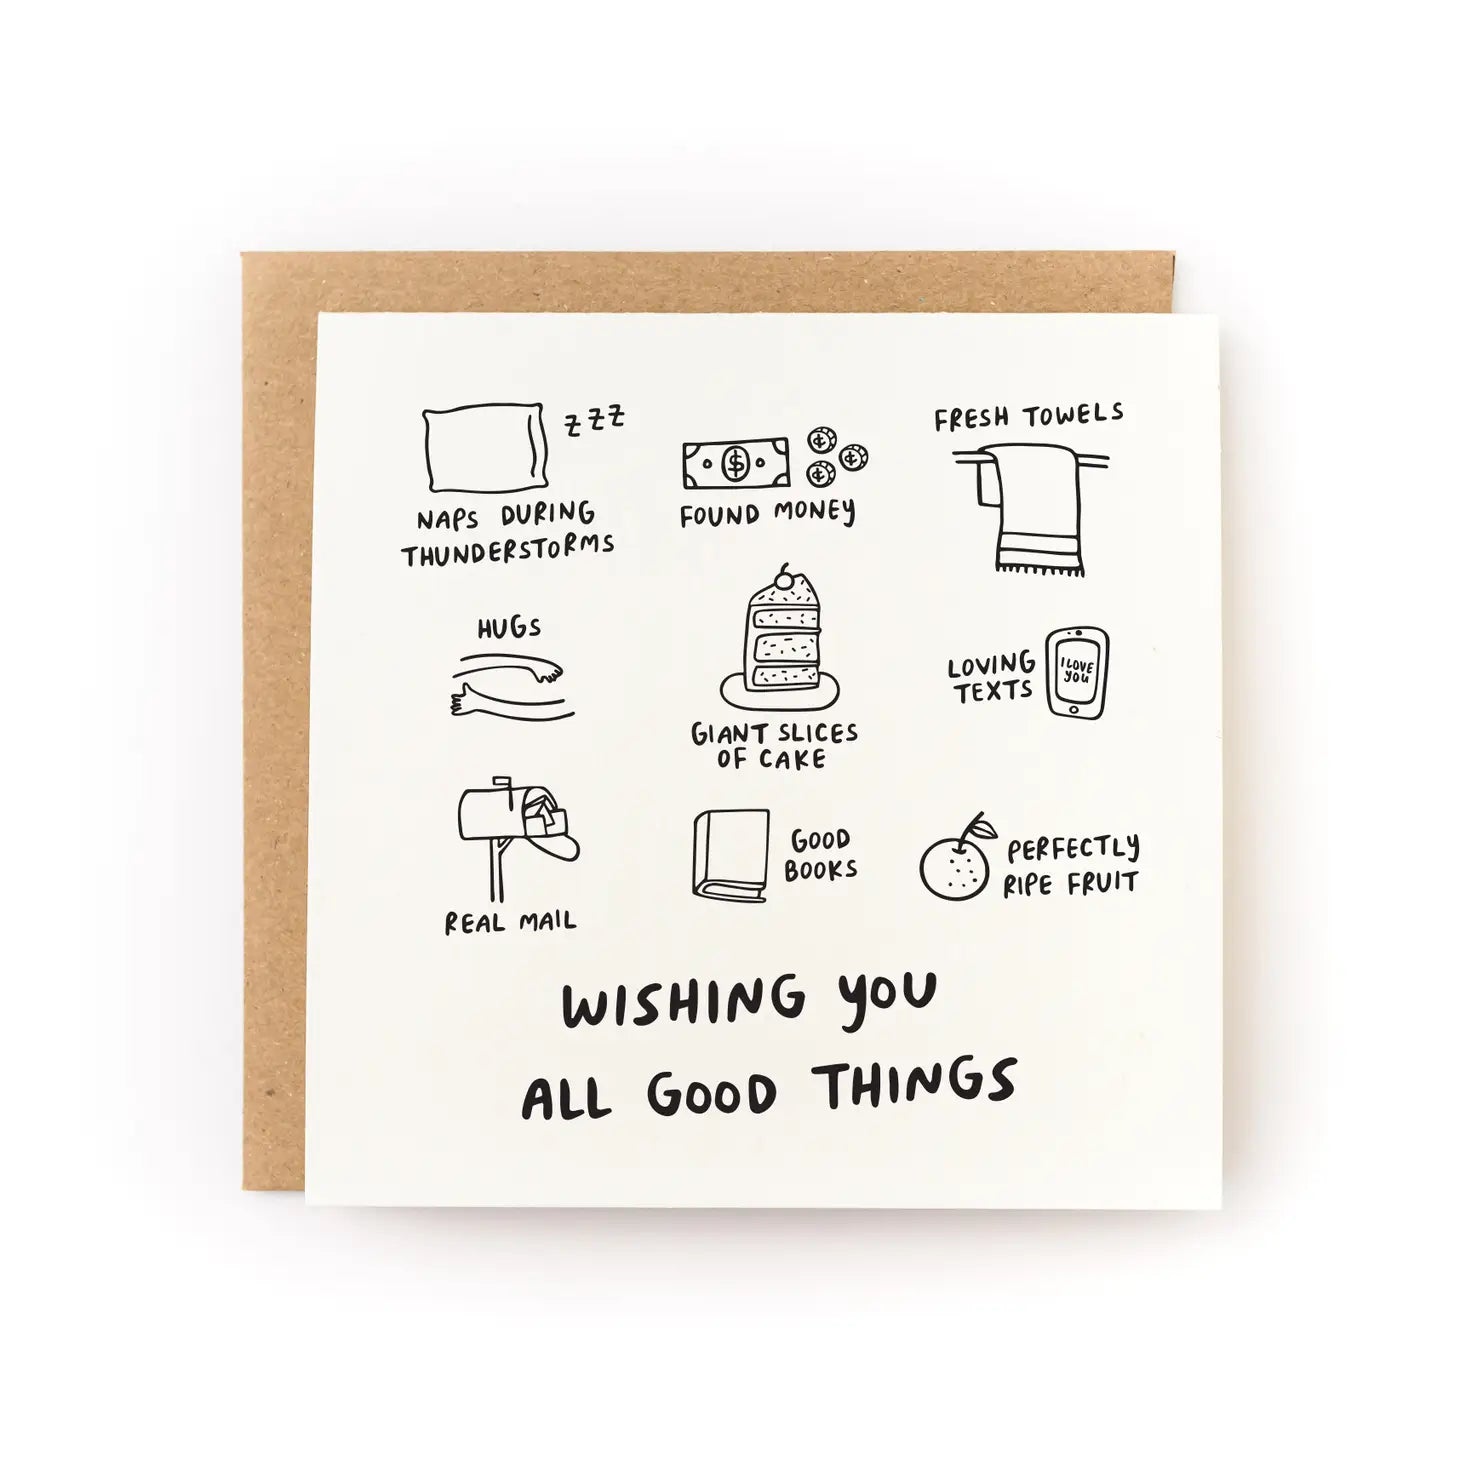 Wishing You All Good Things card